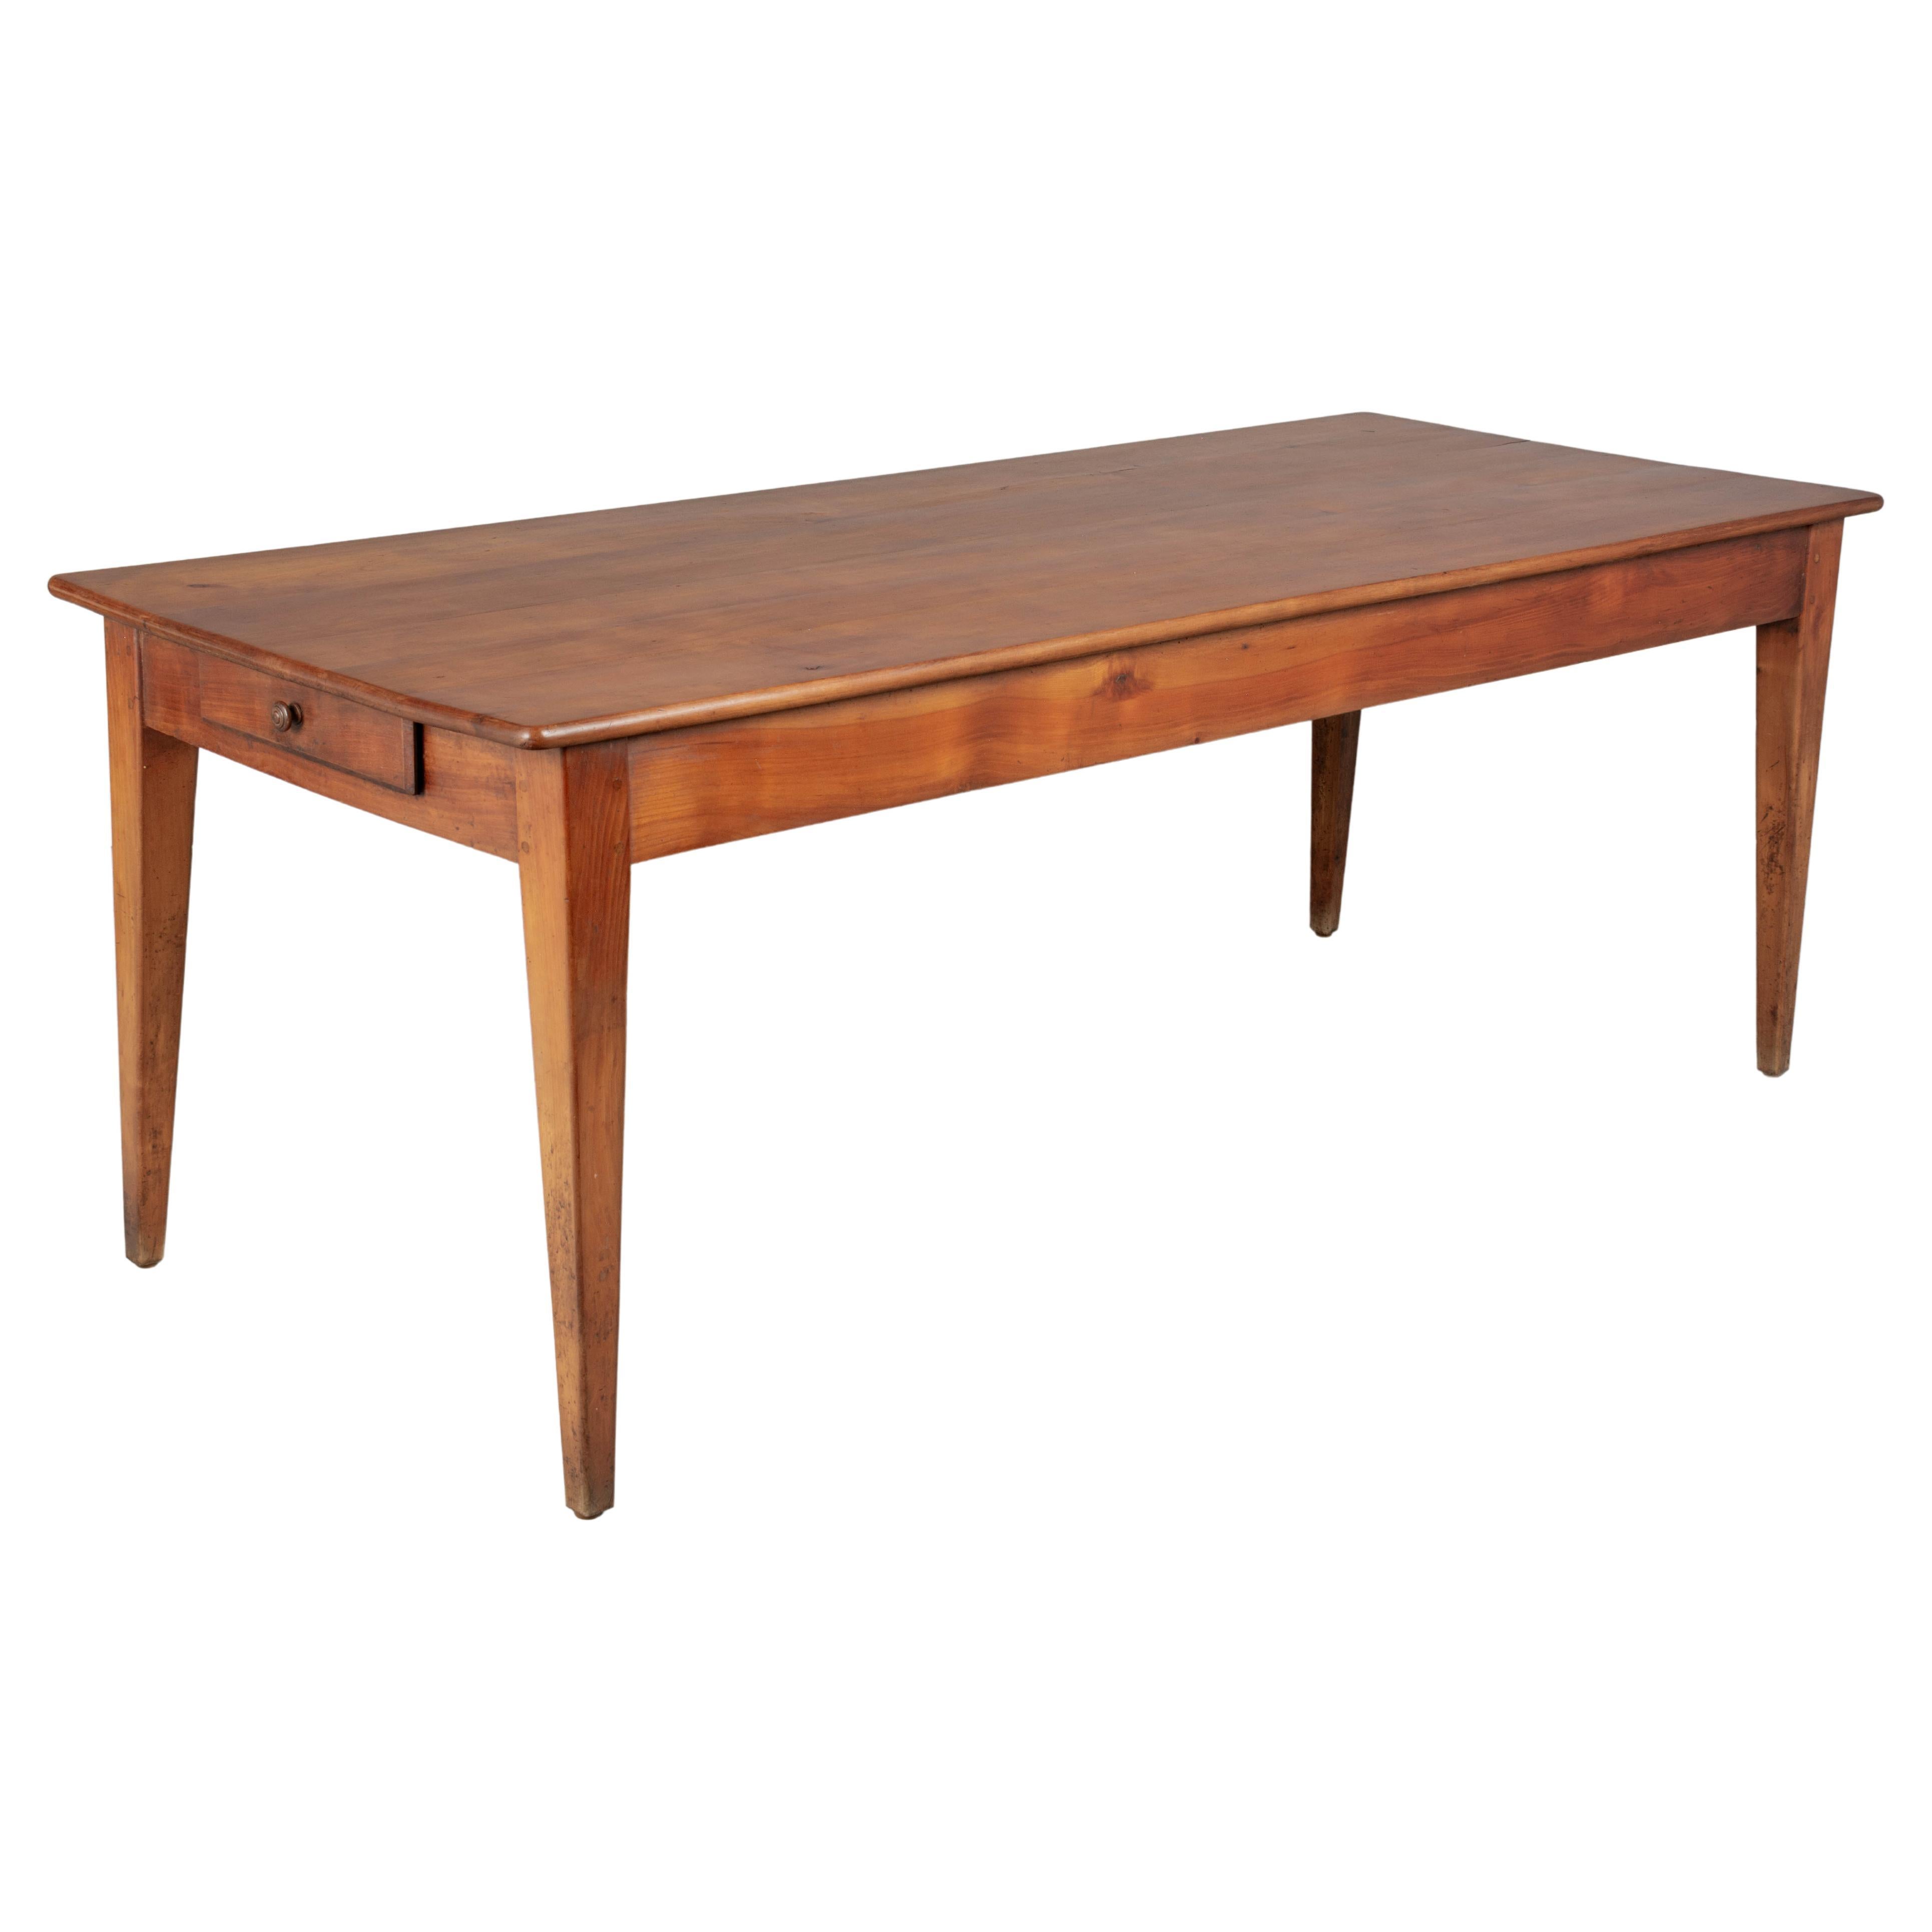 Country French Cherry Farm Table or Dining Table